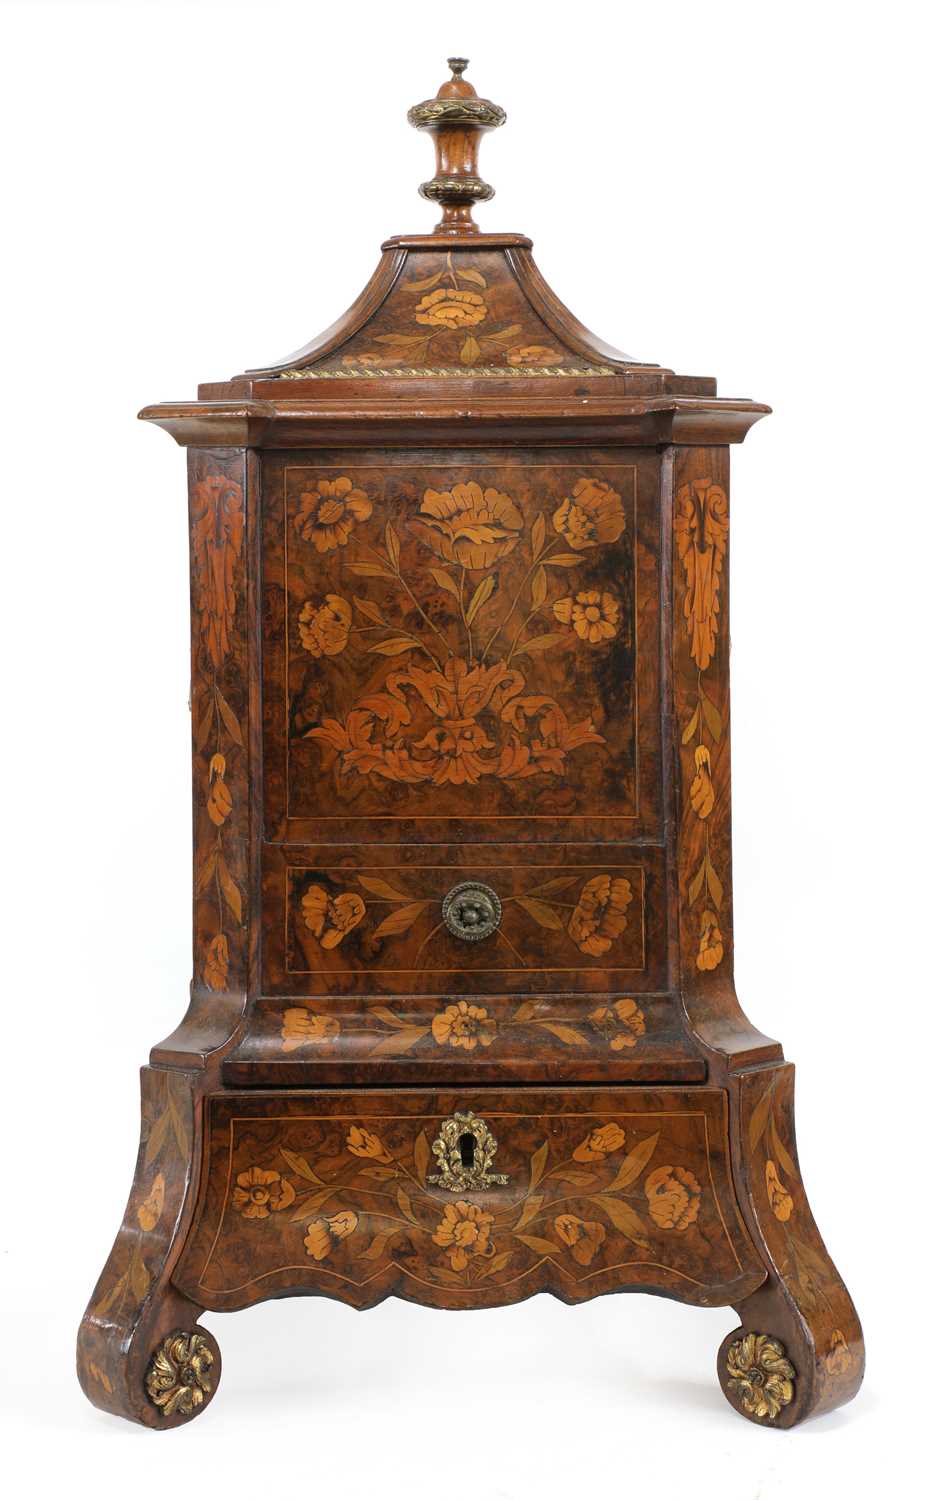 Lot 279 - An unusual Dutch marquetry and walnut kettle stand and cover